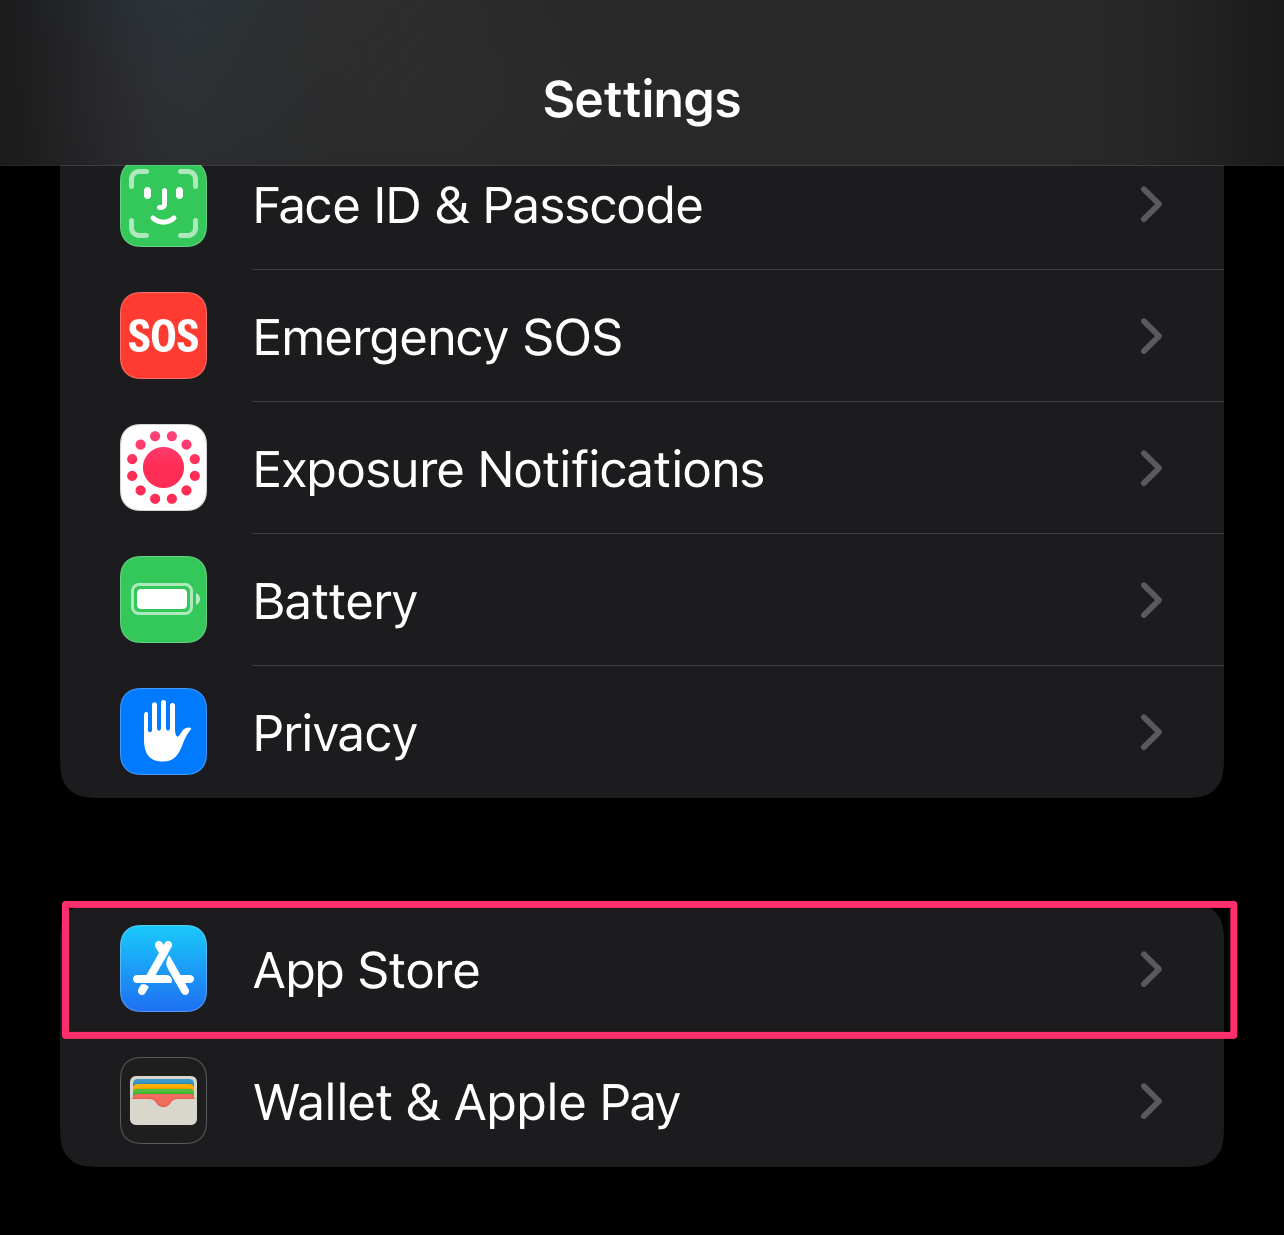 In the Settings app, scroll down and select the App Store option.